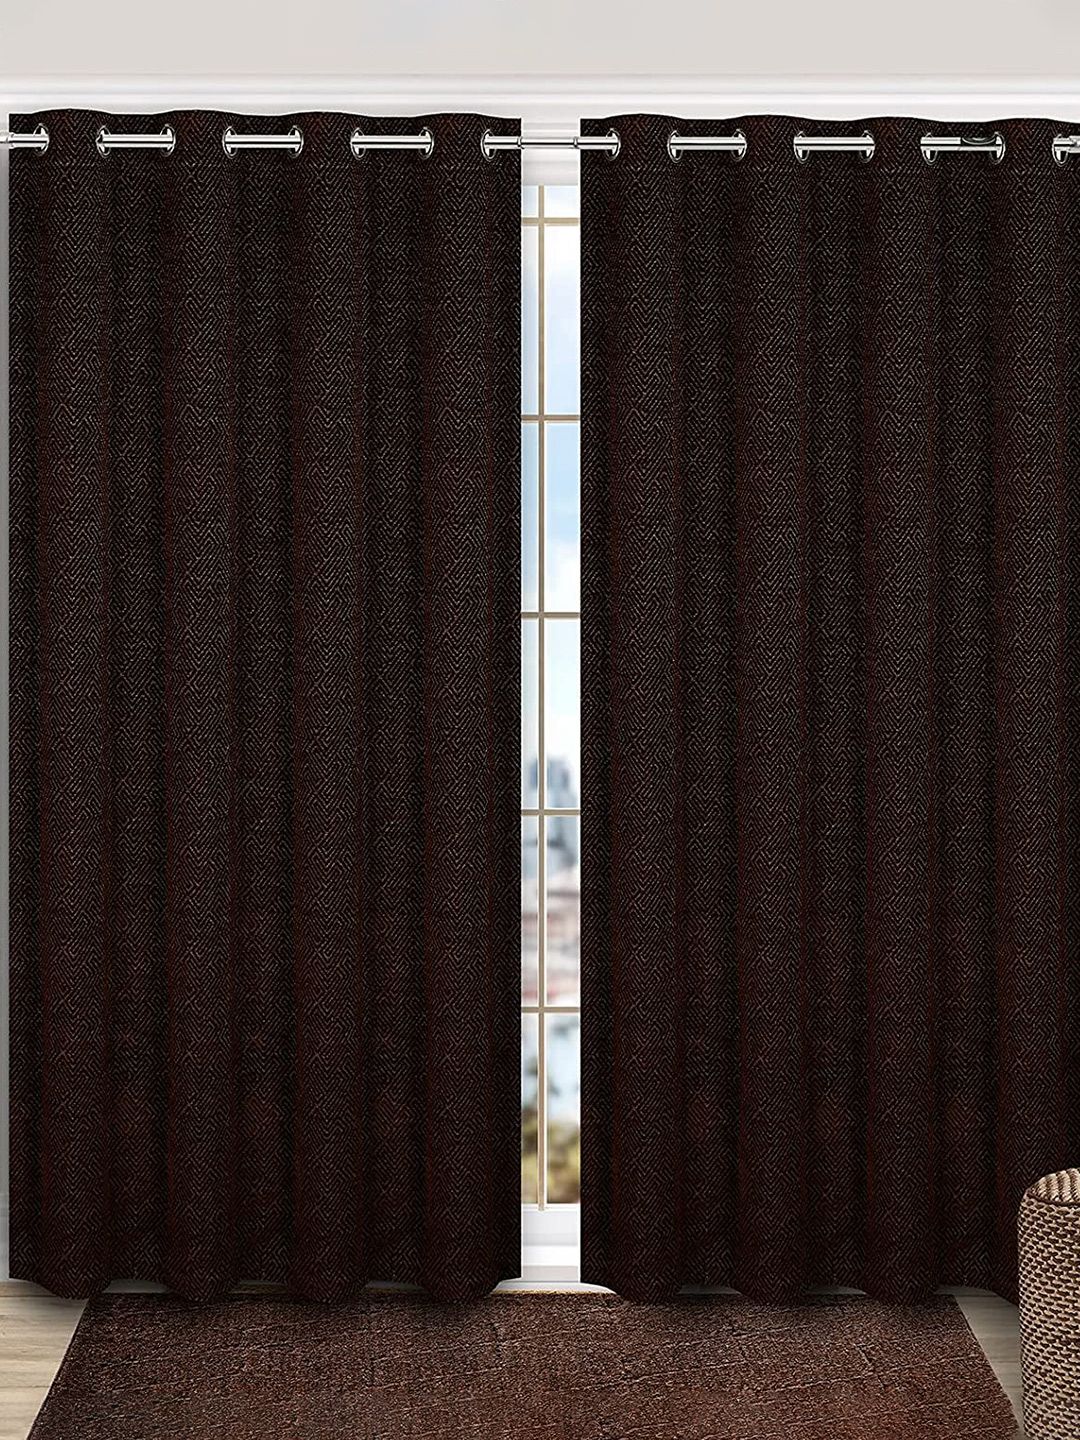 Saral Home Brown Set of 2 Black Out Long Door Curtain Price in India